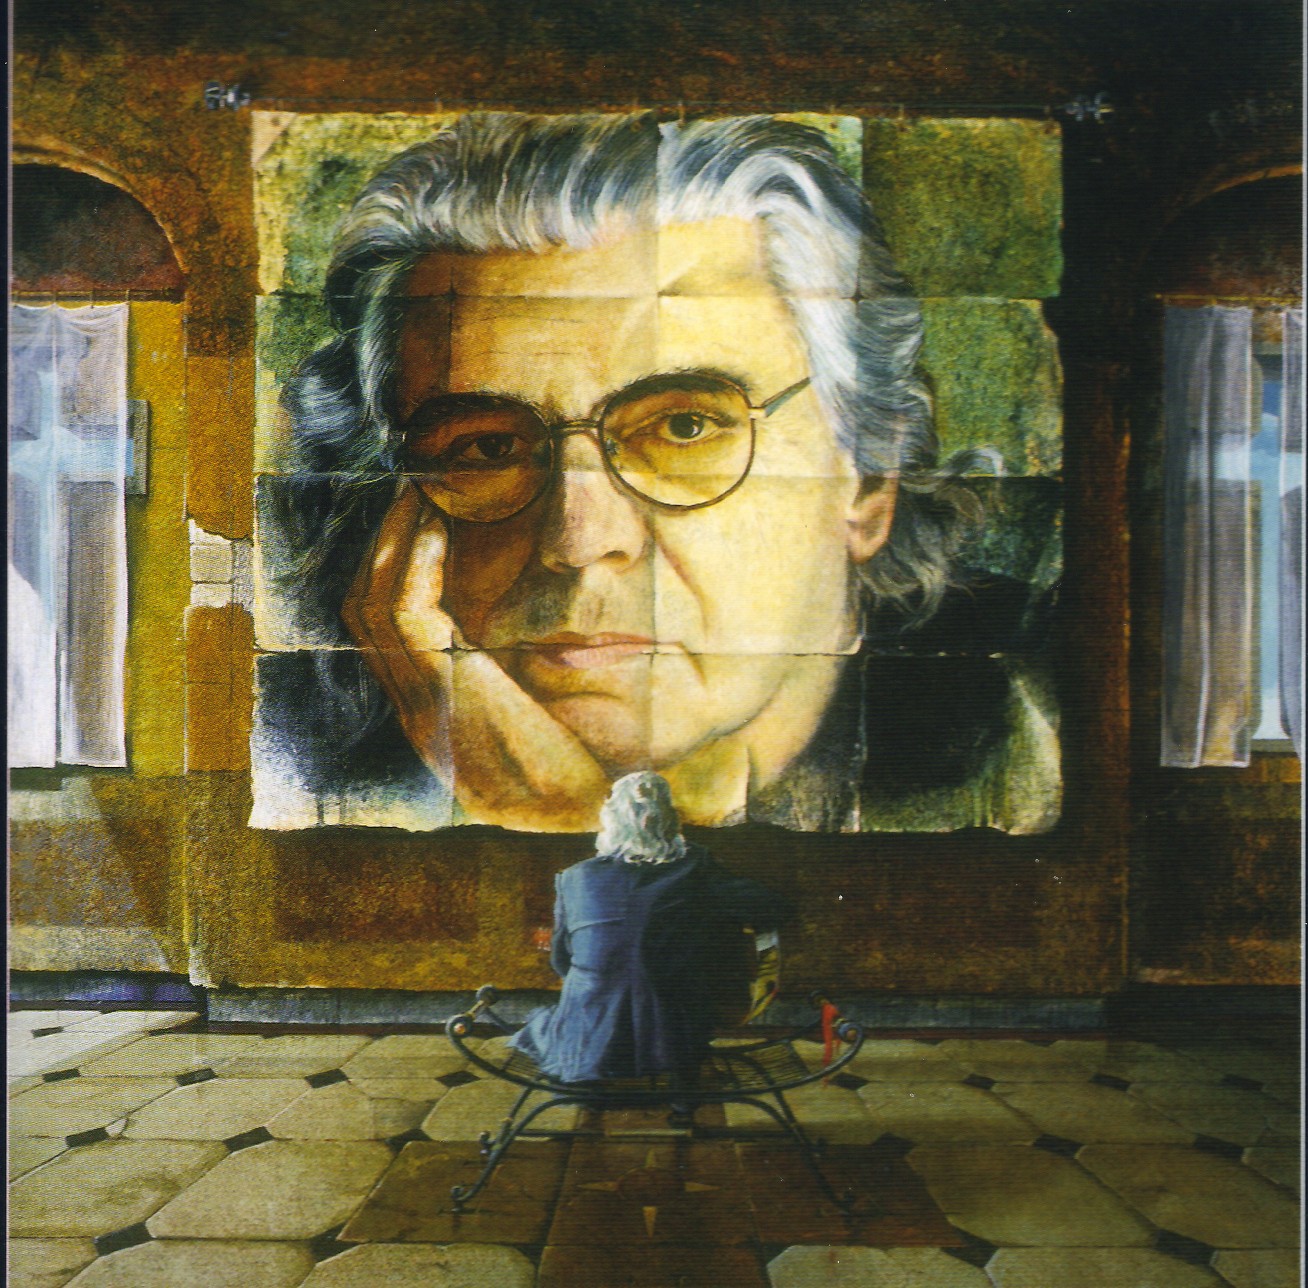 The painting of Tim that was intended as the album cover for "American Son"